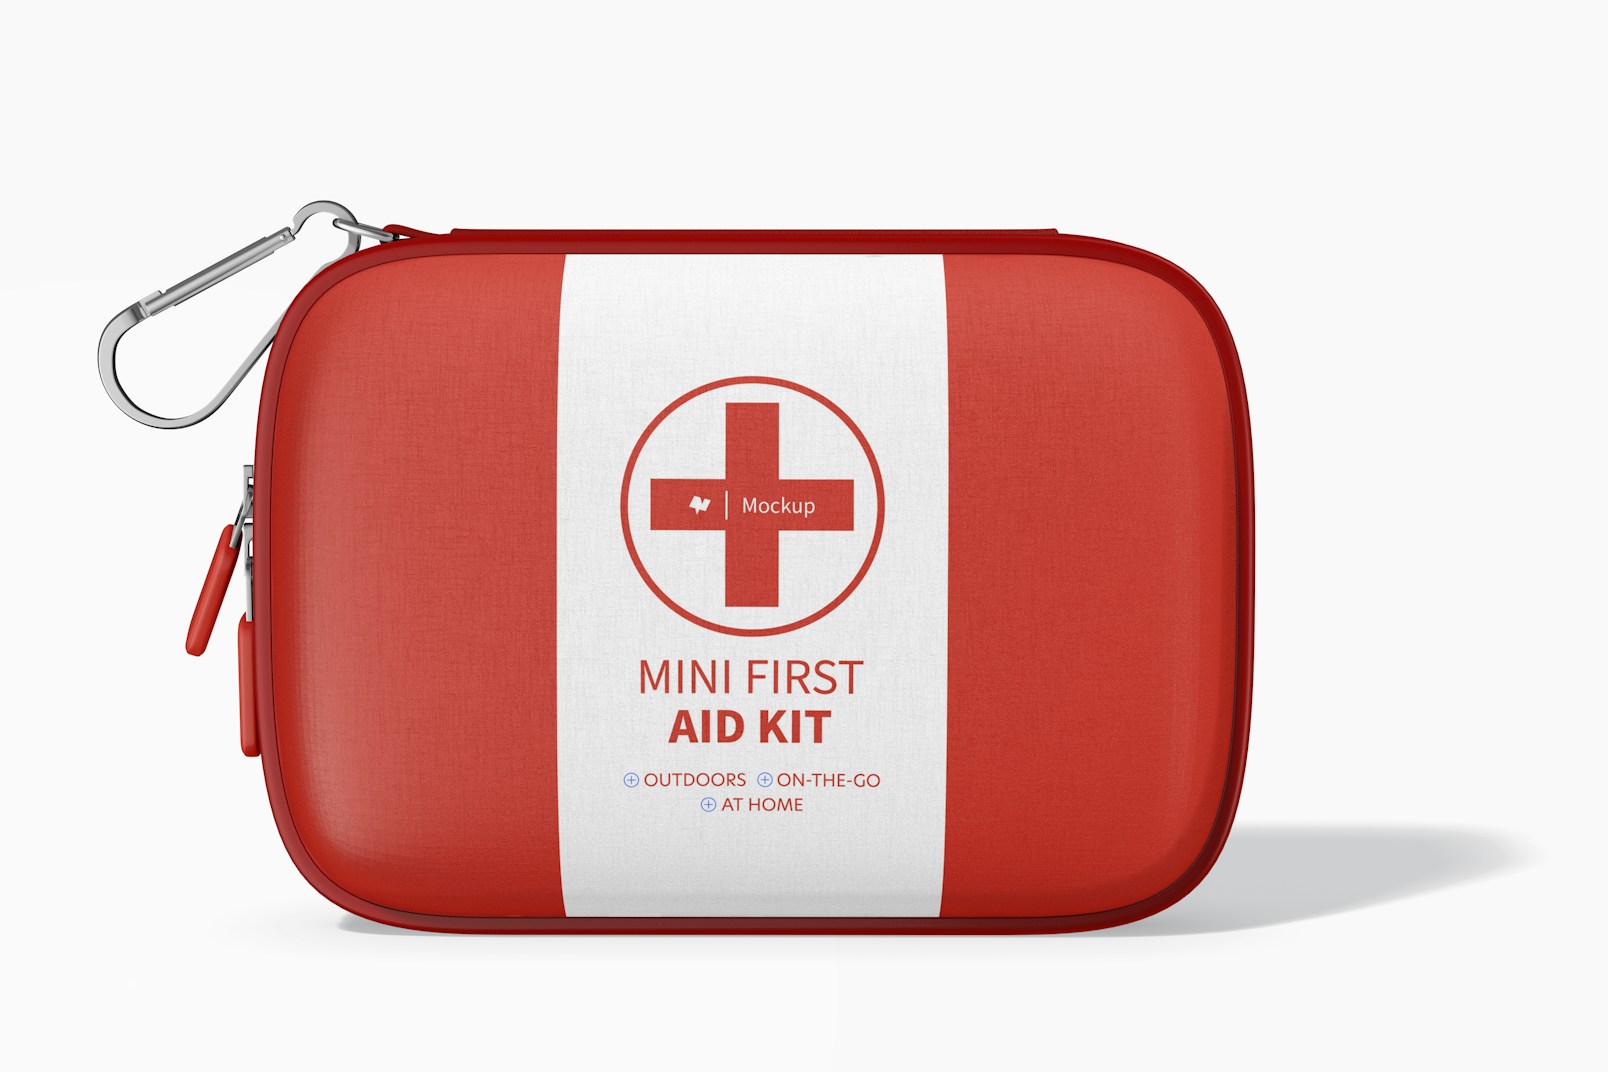 Mini First Aid Kit Mockup, Front View